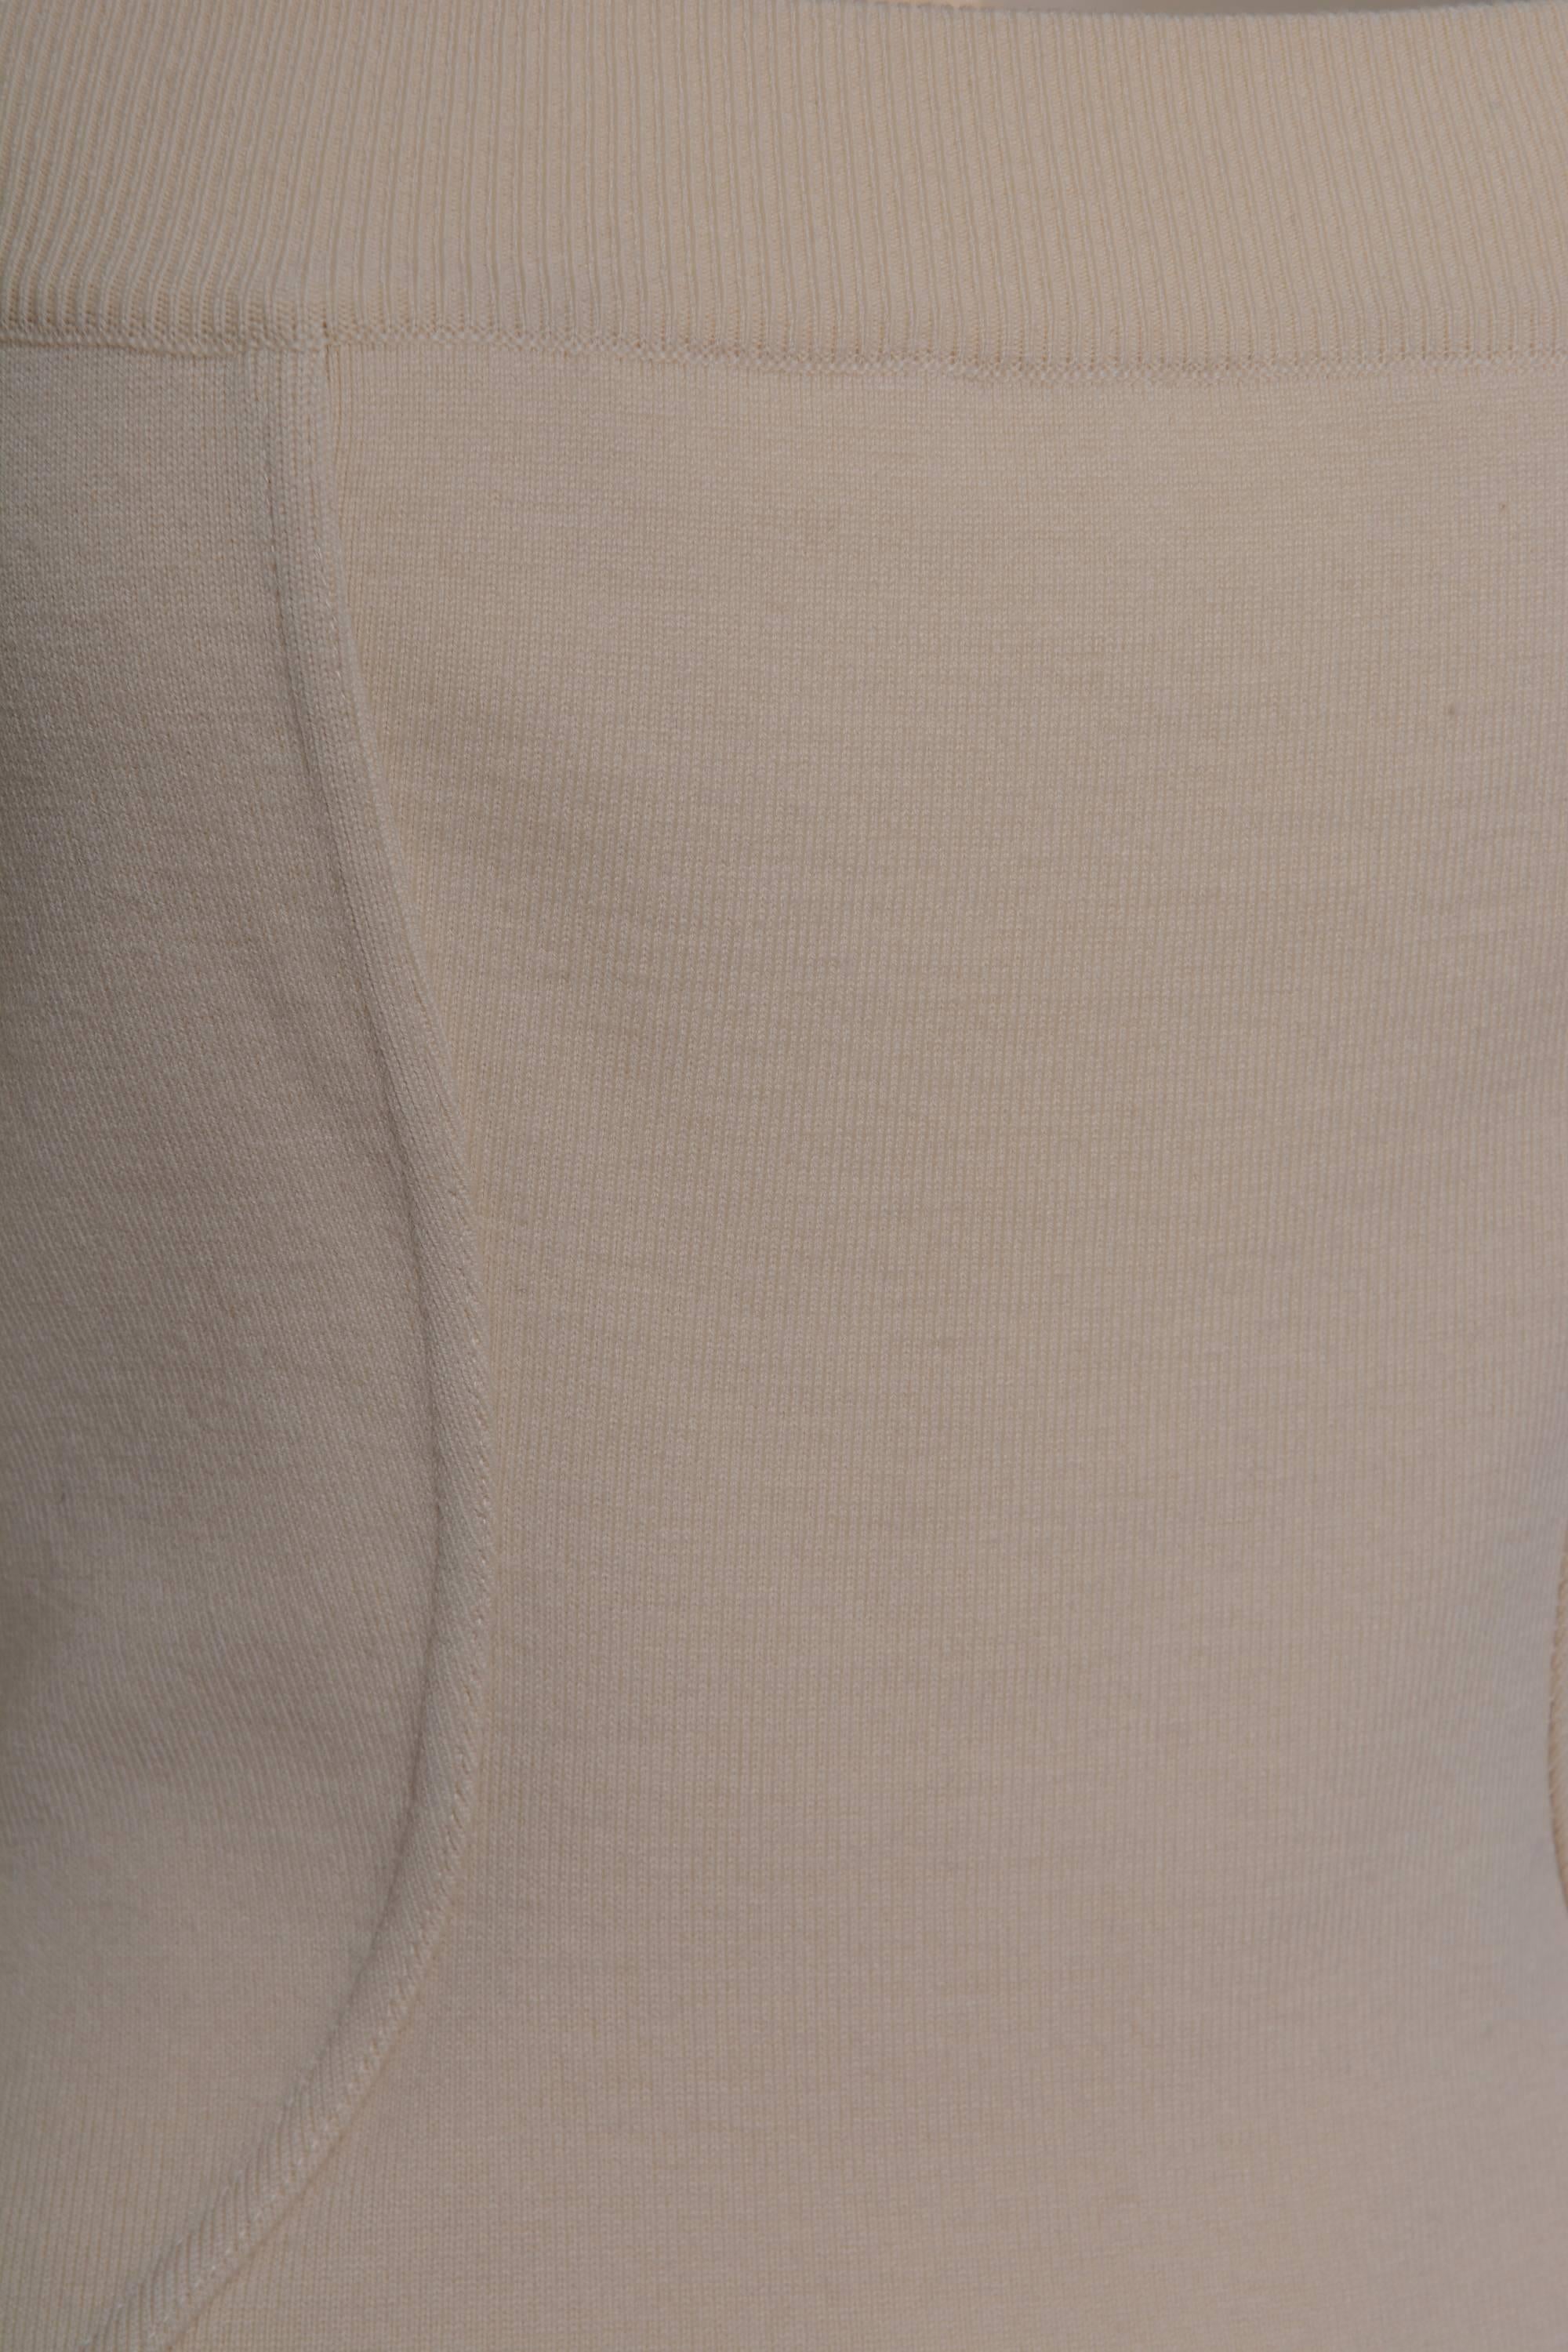 Alaia Nude Sweater Off-the-Shoulder Dress In Excellent Condition In Milan, Italy